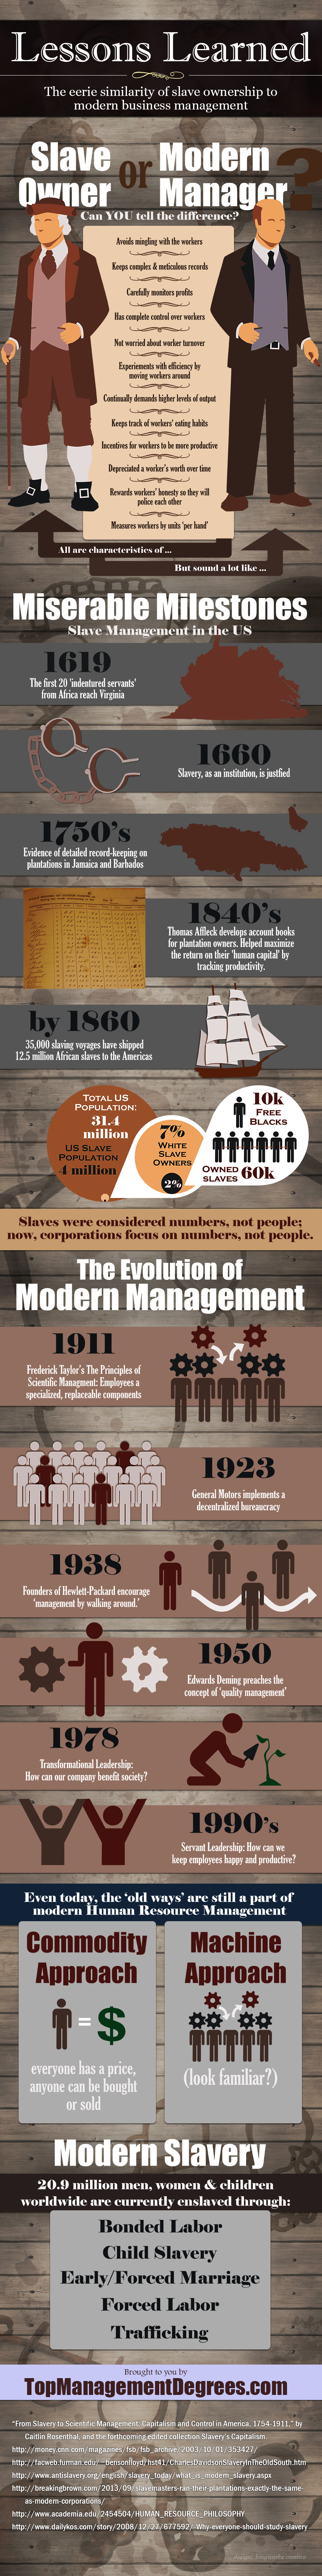 Slave Owners vs. Modern Management: Can You Tell the Difference?